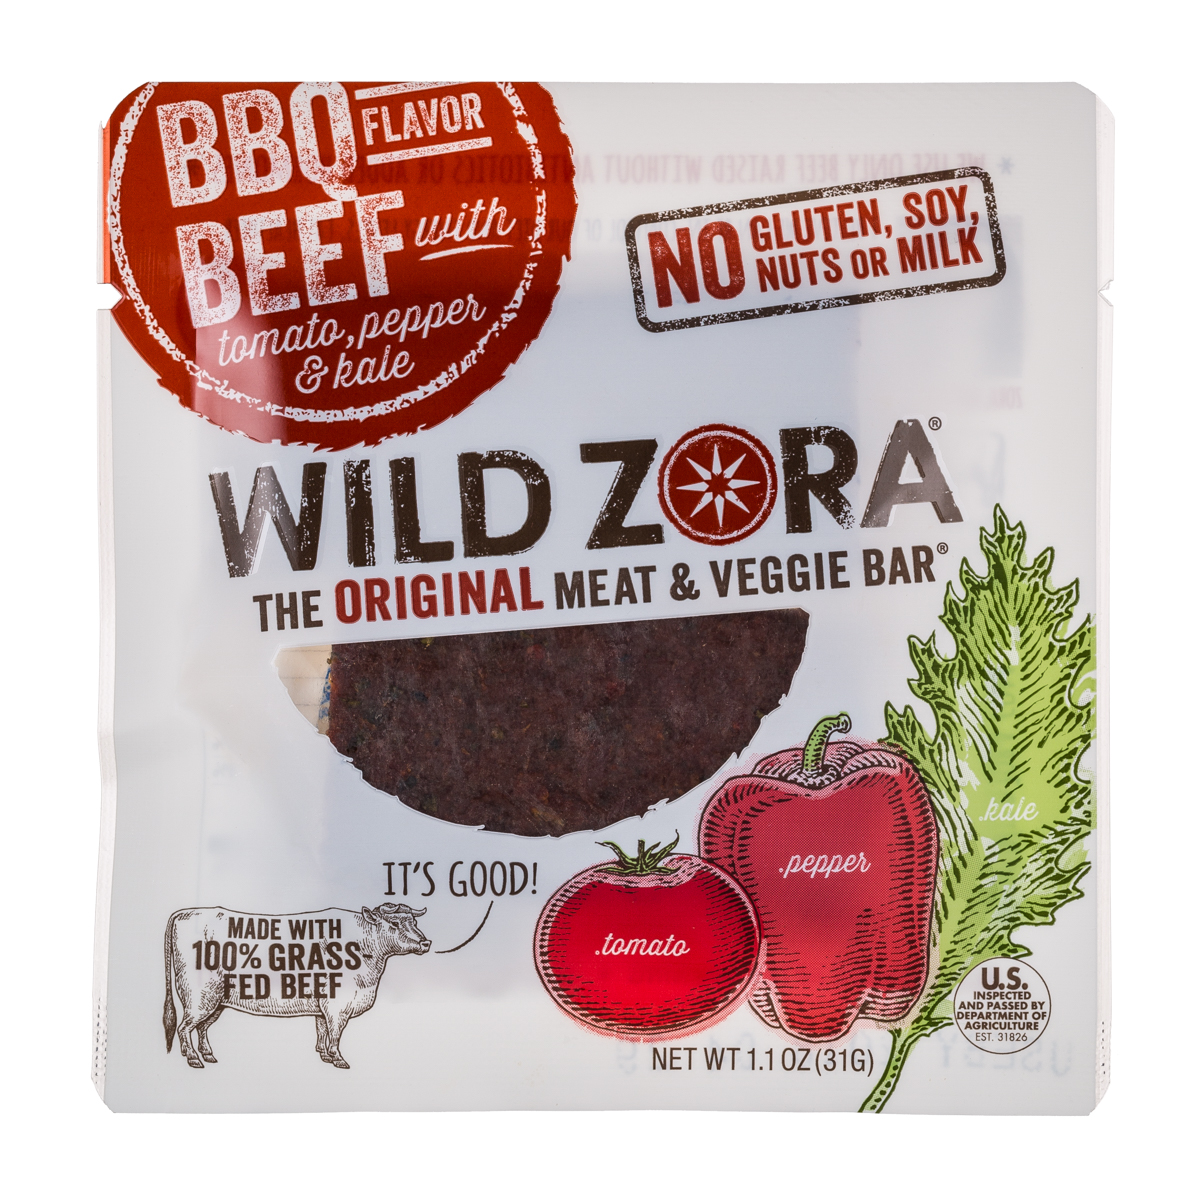 BBQ Beef with Tomato, Pepper & Kale (2017)